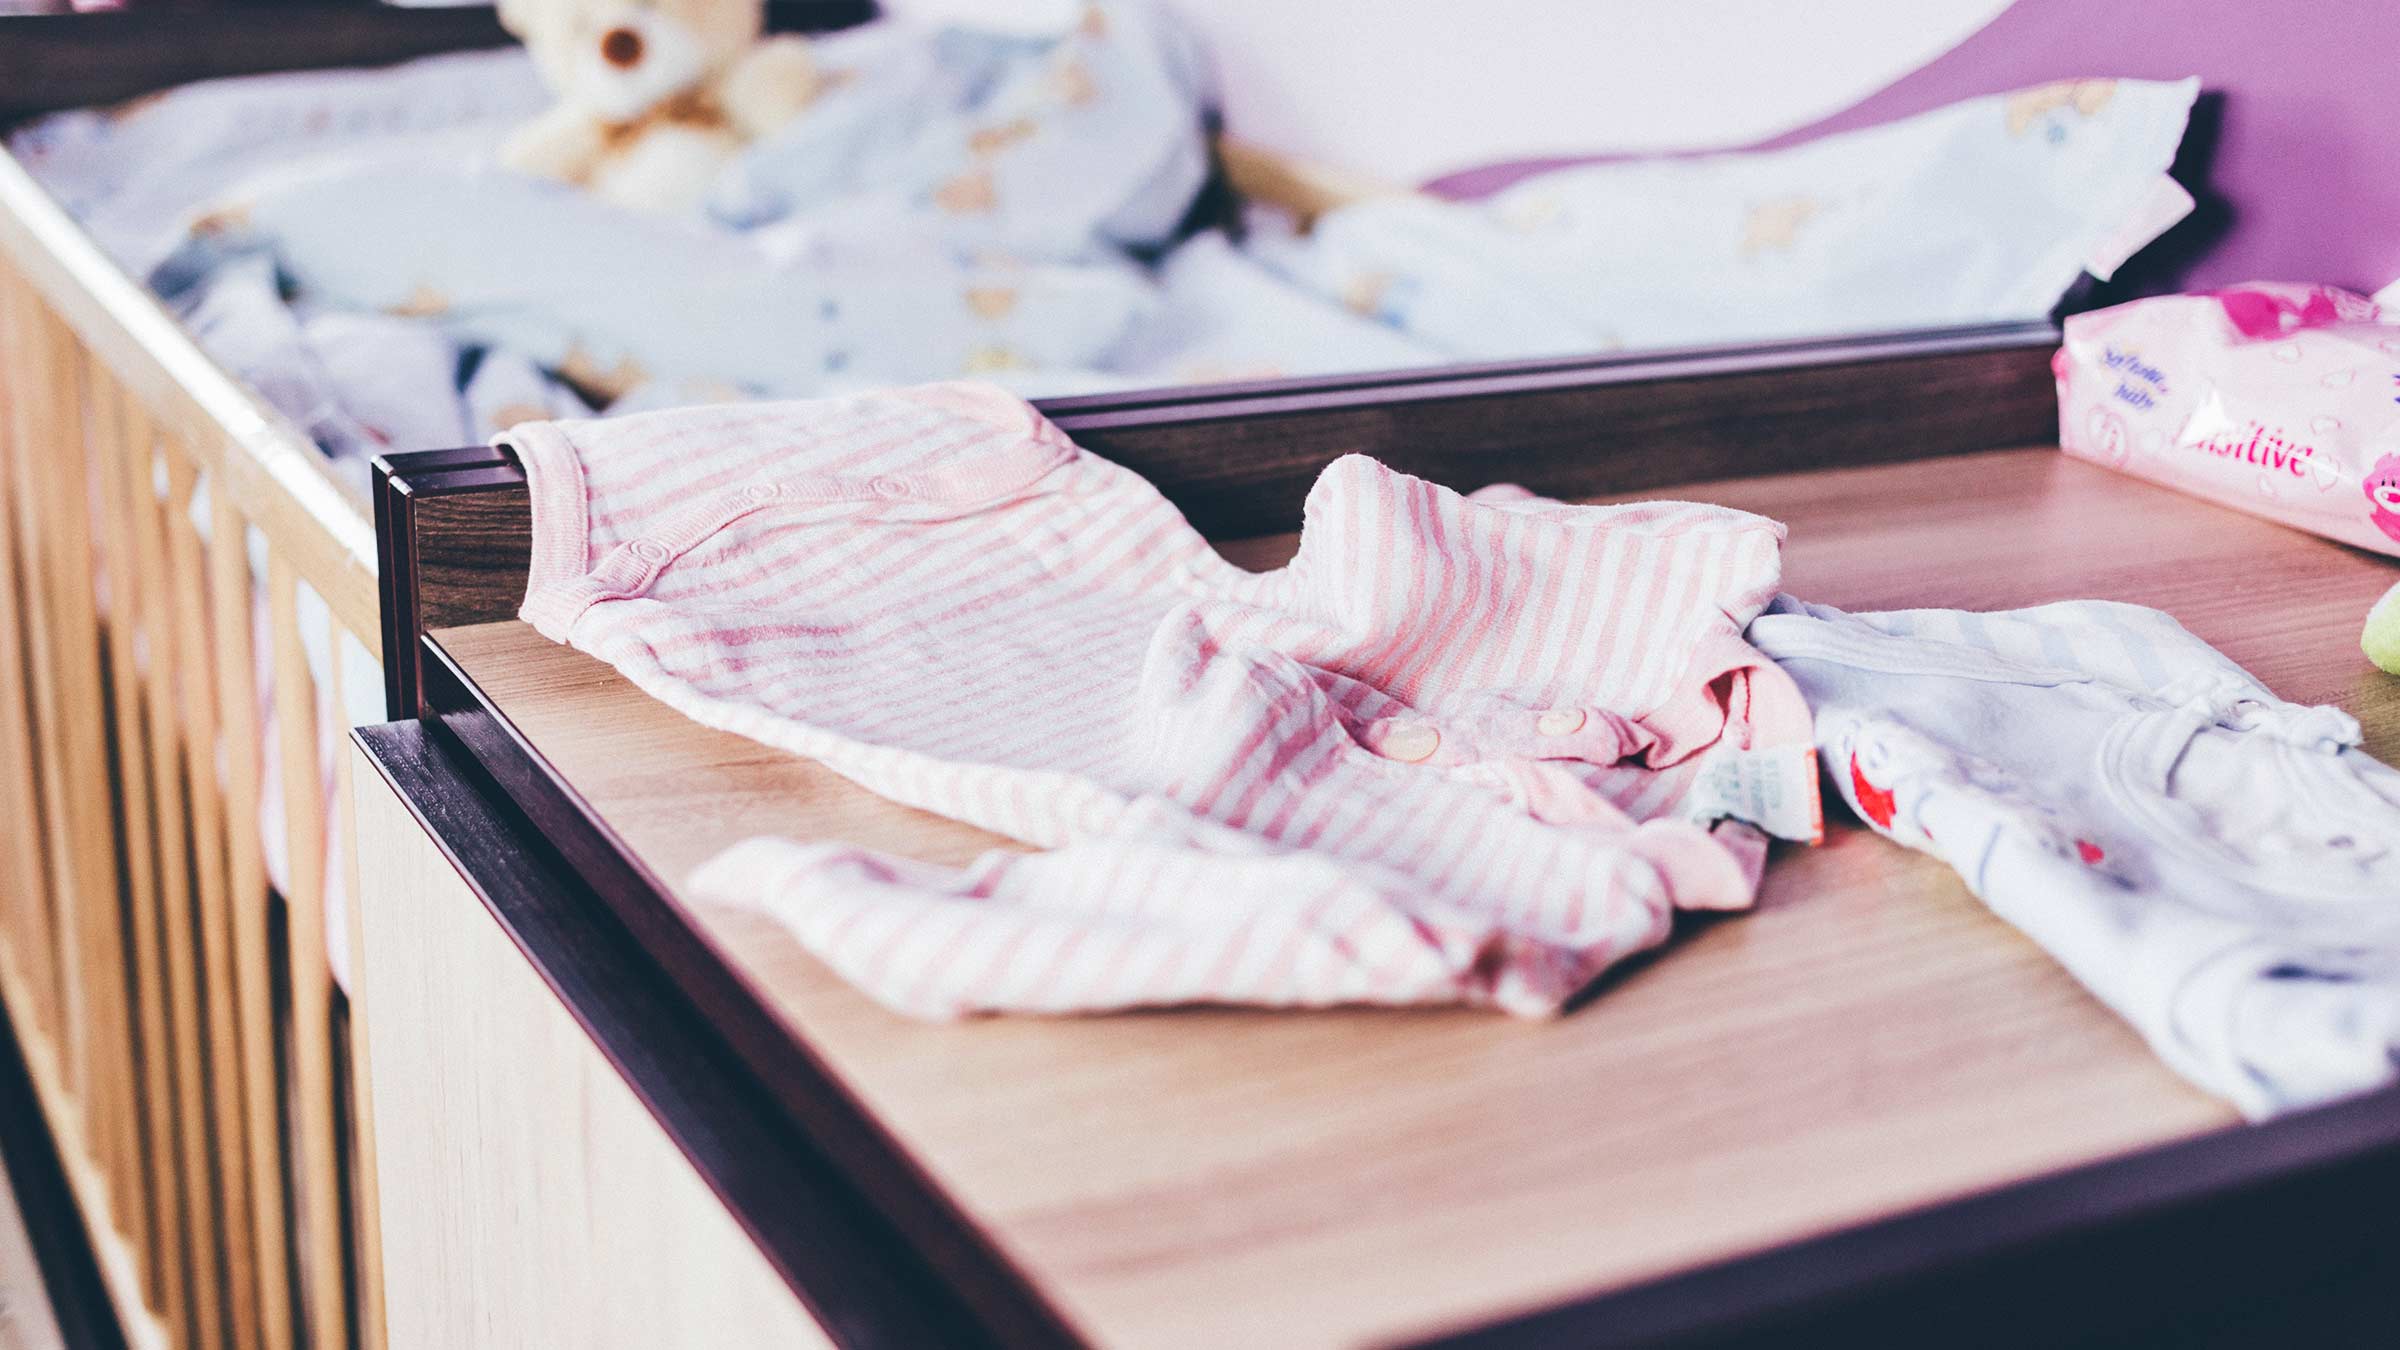 With consumer spending rising, who’s getting it right in the baby products industry?